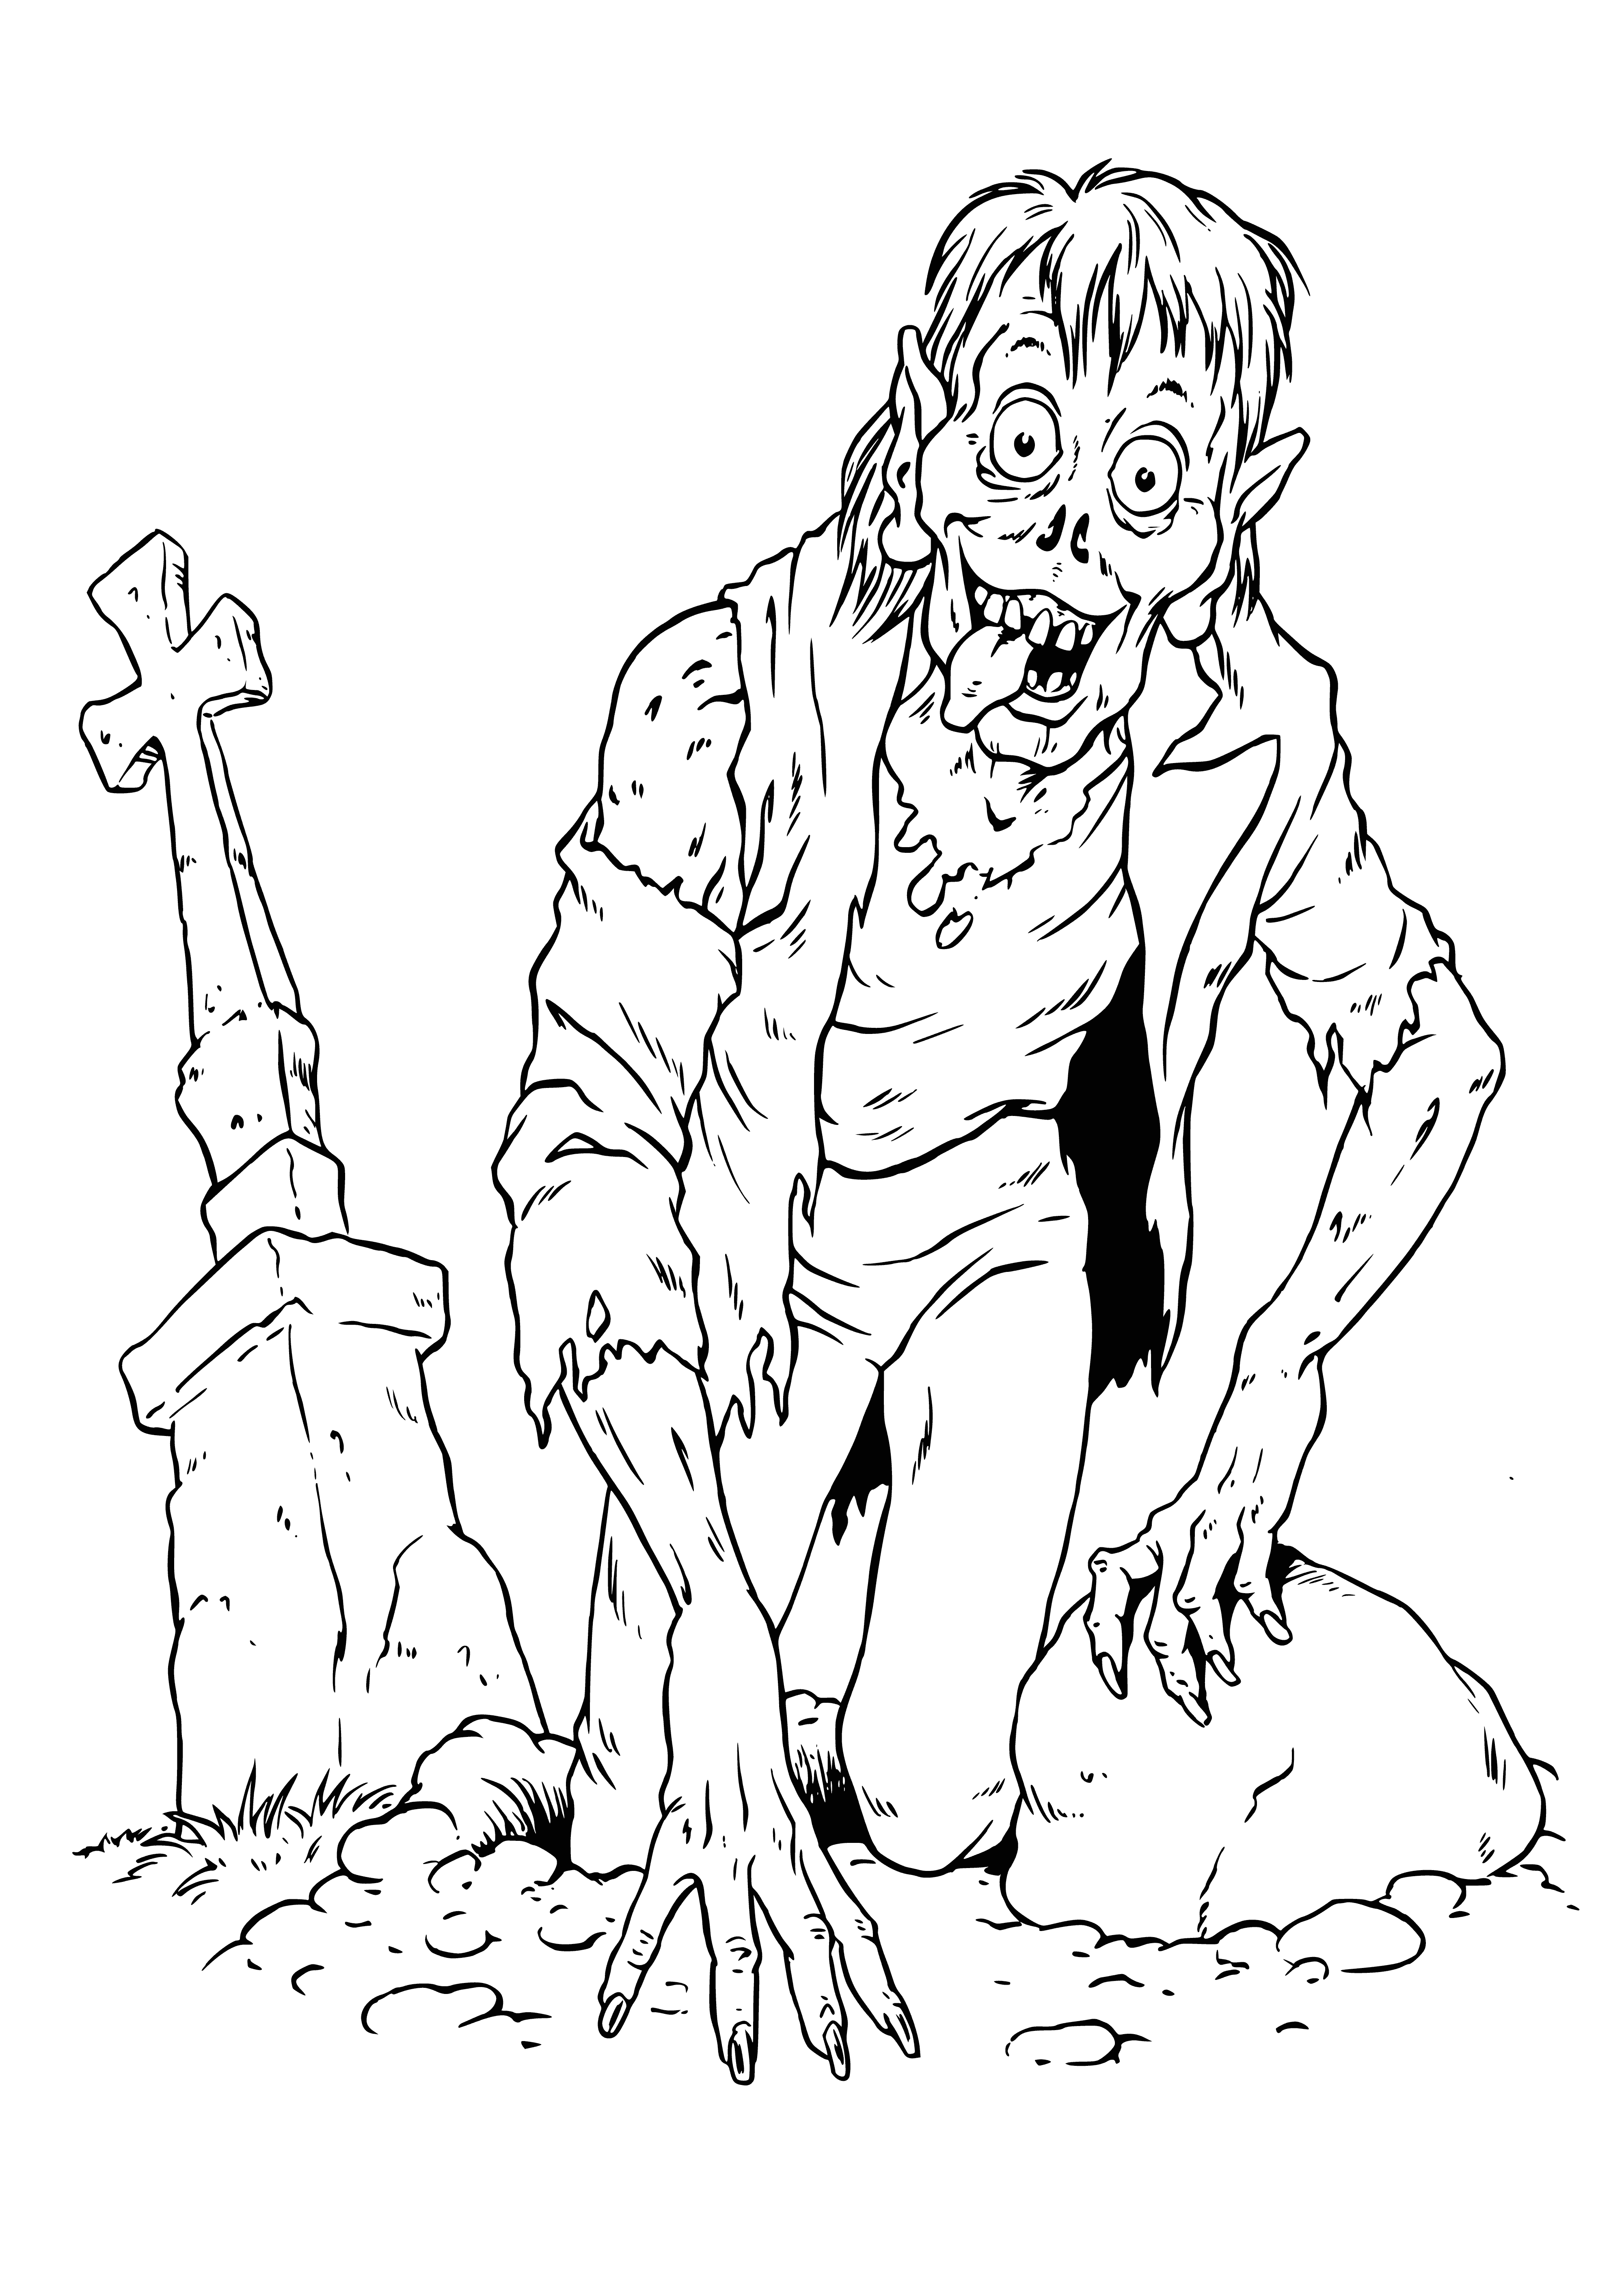 coloring page: Zombies are undead corpses seeking human flesh, usually portrayed as monsters and villains in coloring pages.